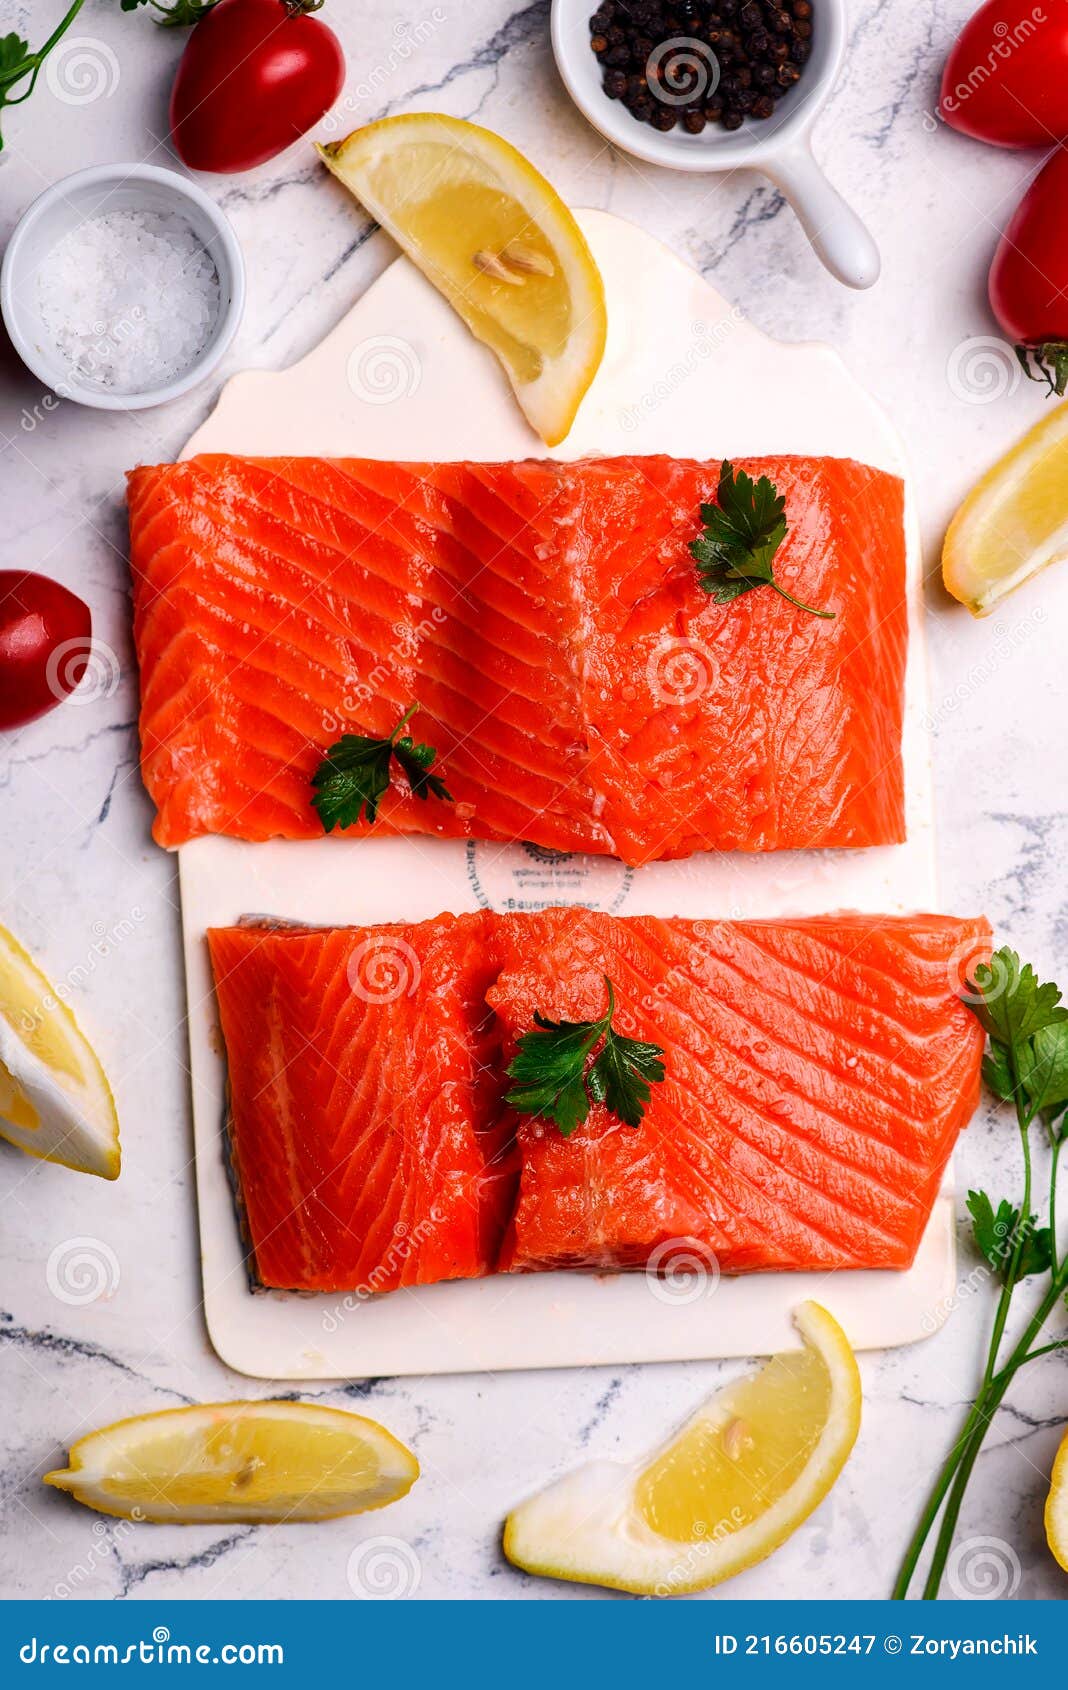 Raw salmon.top view stock image. Image of rustic, seafood - 216605247